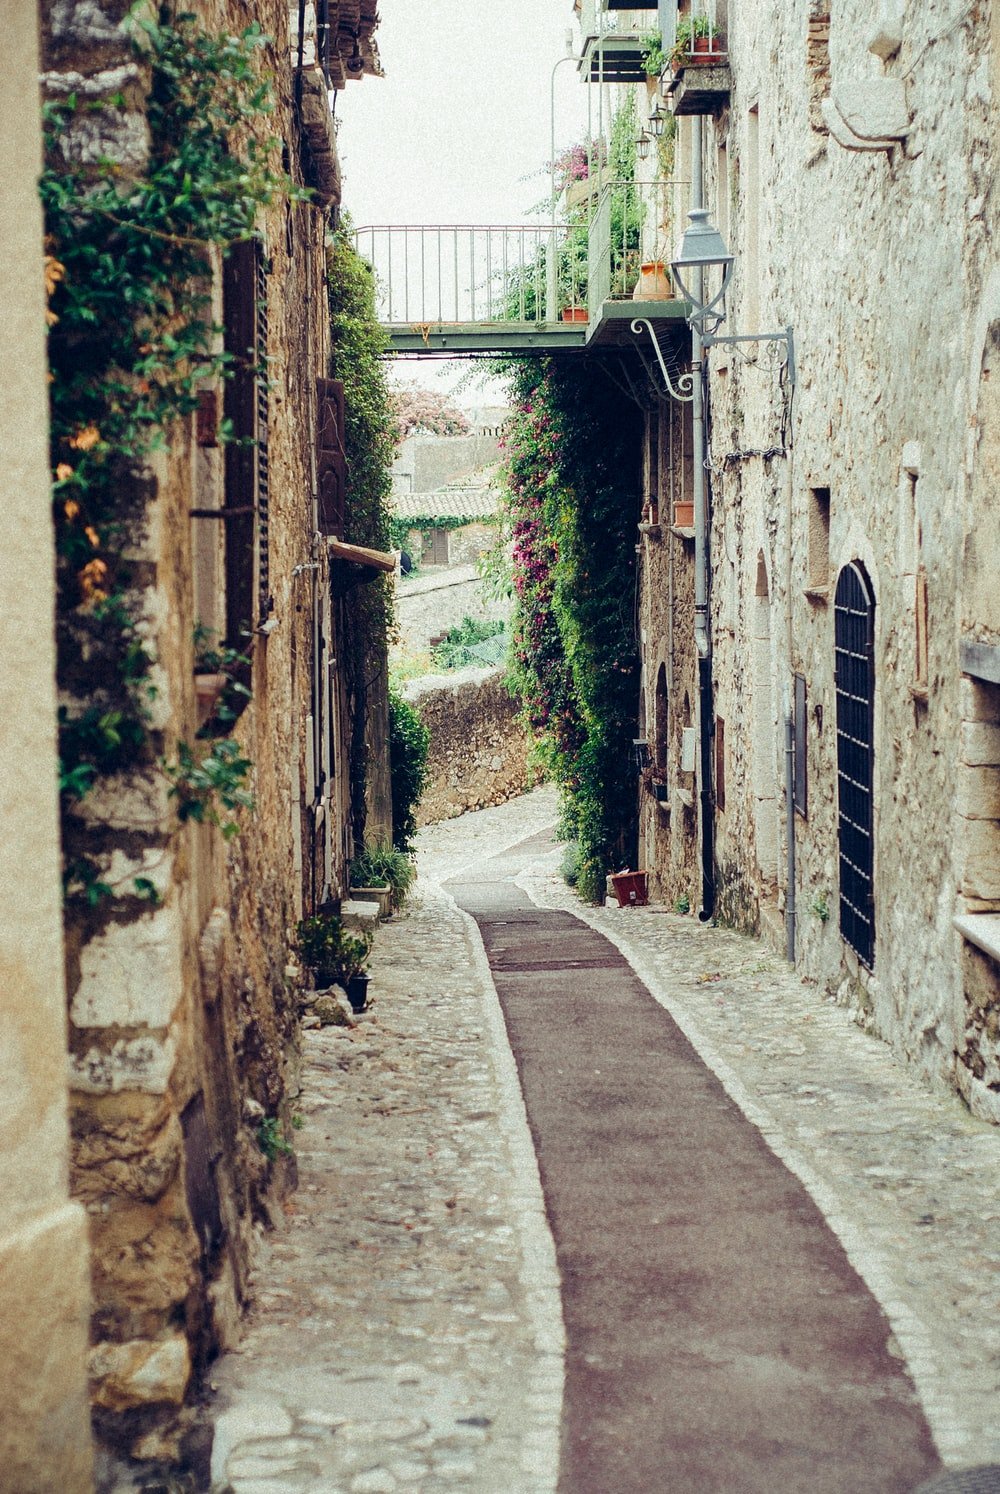 Beautiful Italy Picture. Download Free Image